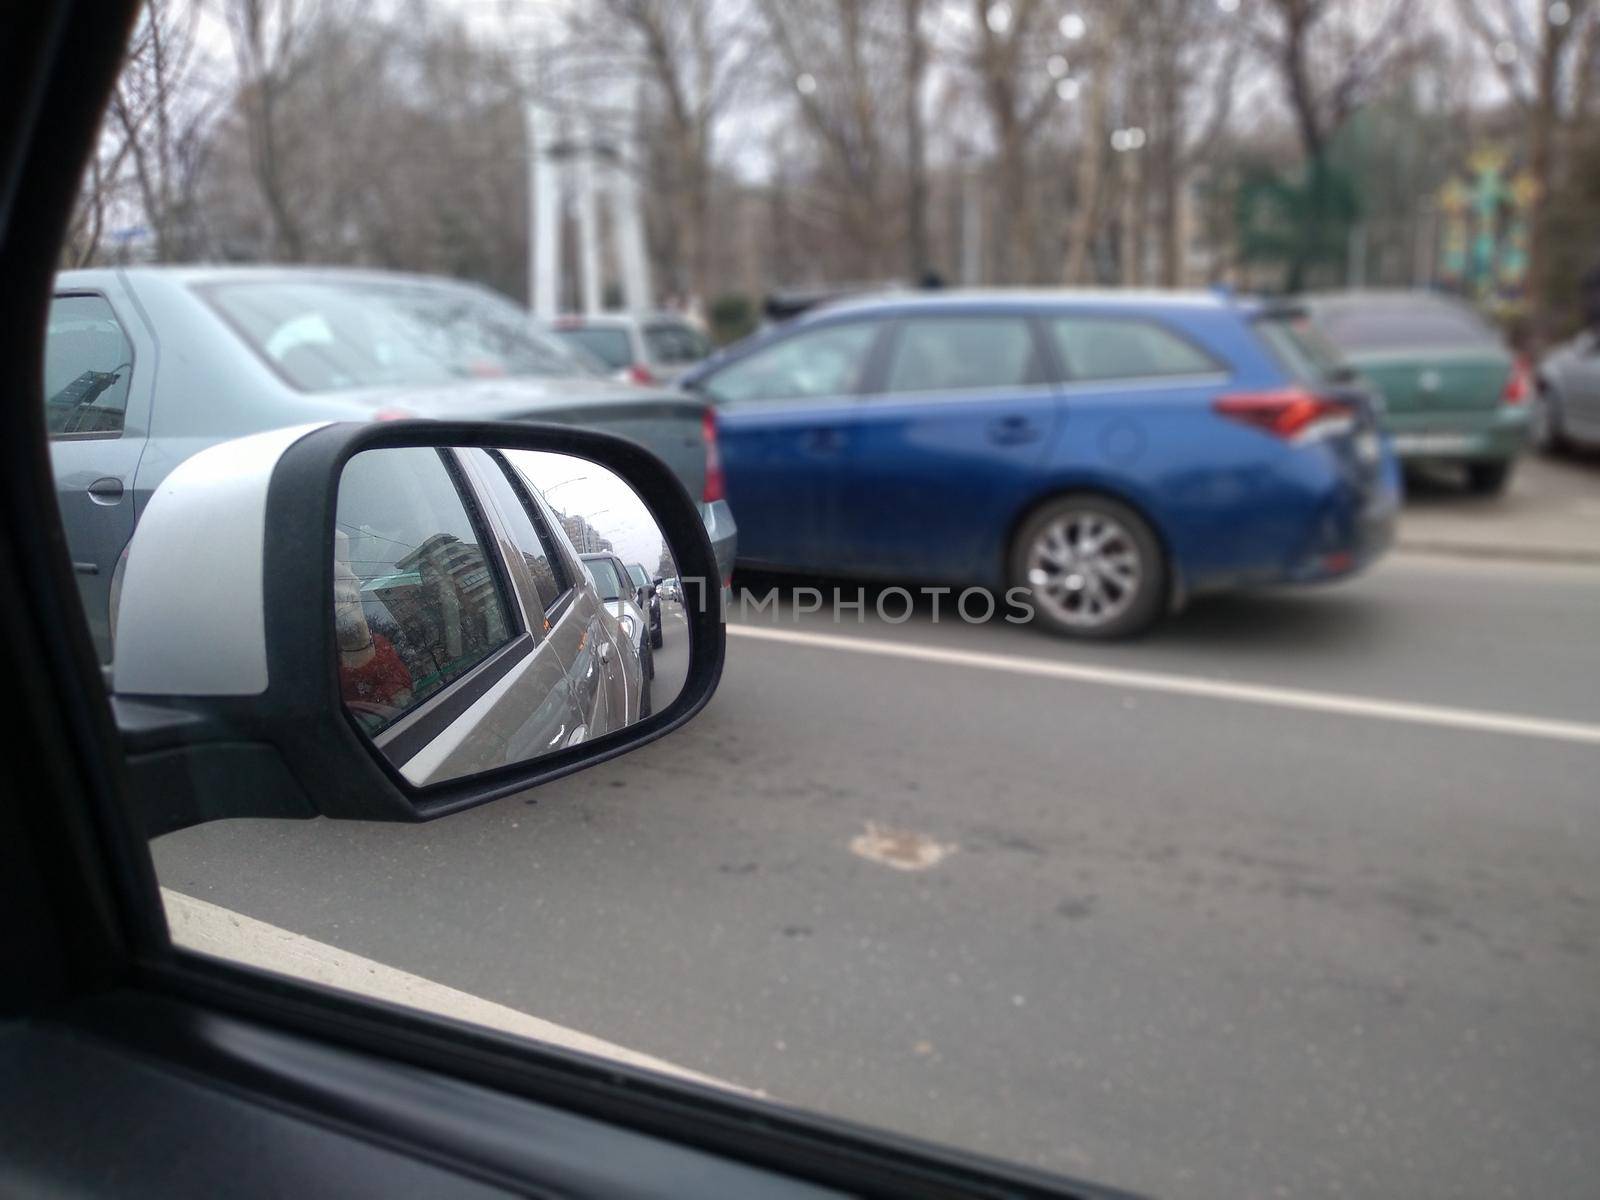 Road view through car window and mirror, cars on road in traffic in Bucharest, Romania, 2021 by vladispas